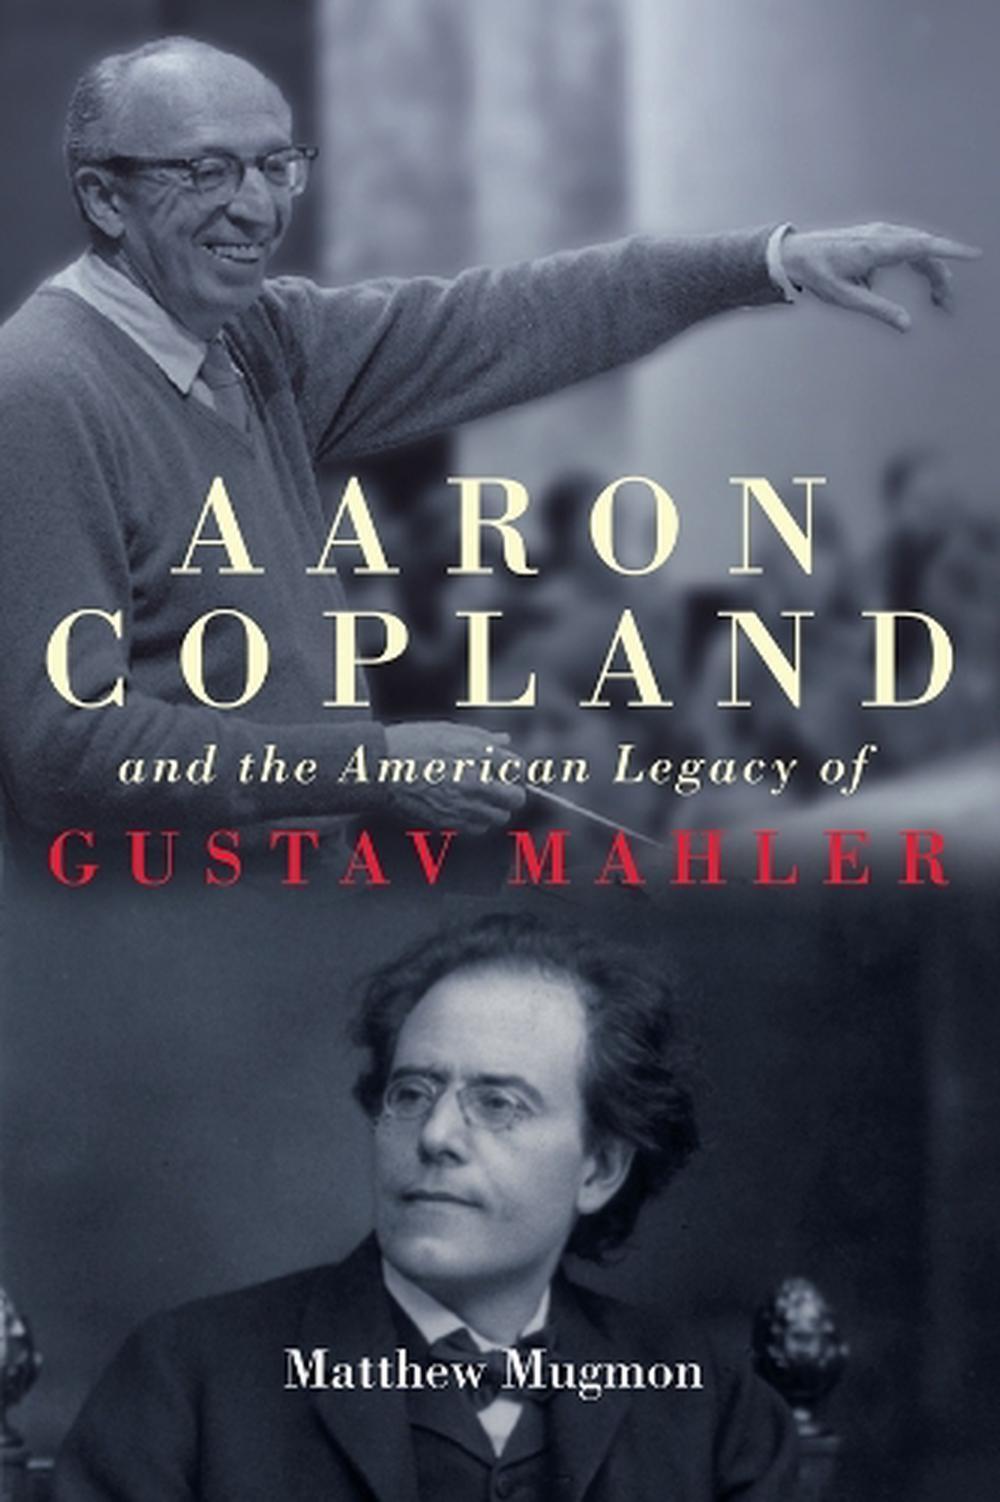 Aaron Copland and the American Legacy of Gustav Mahler by Matthew Mugmon (Englis